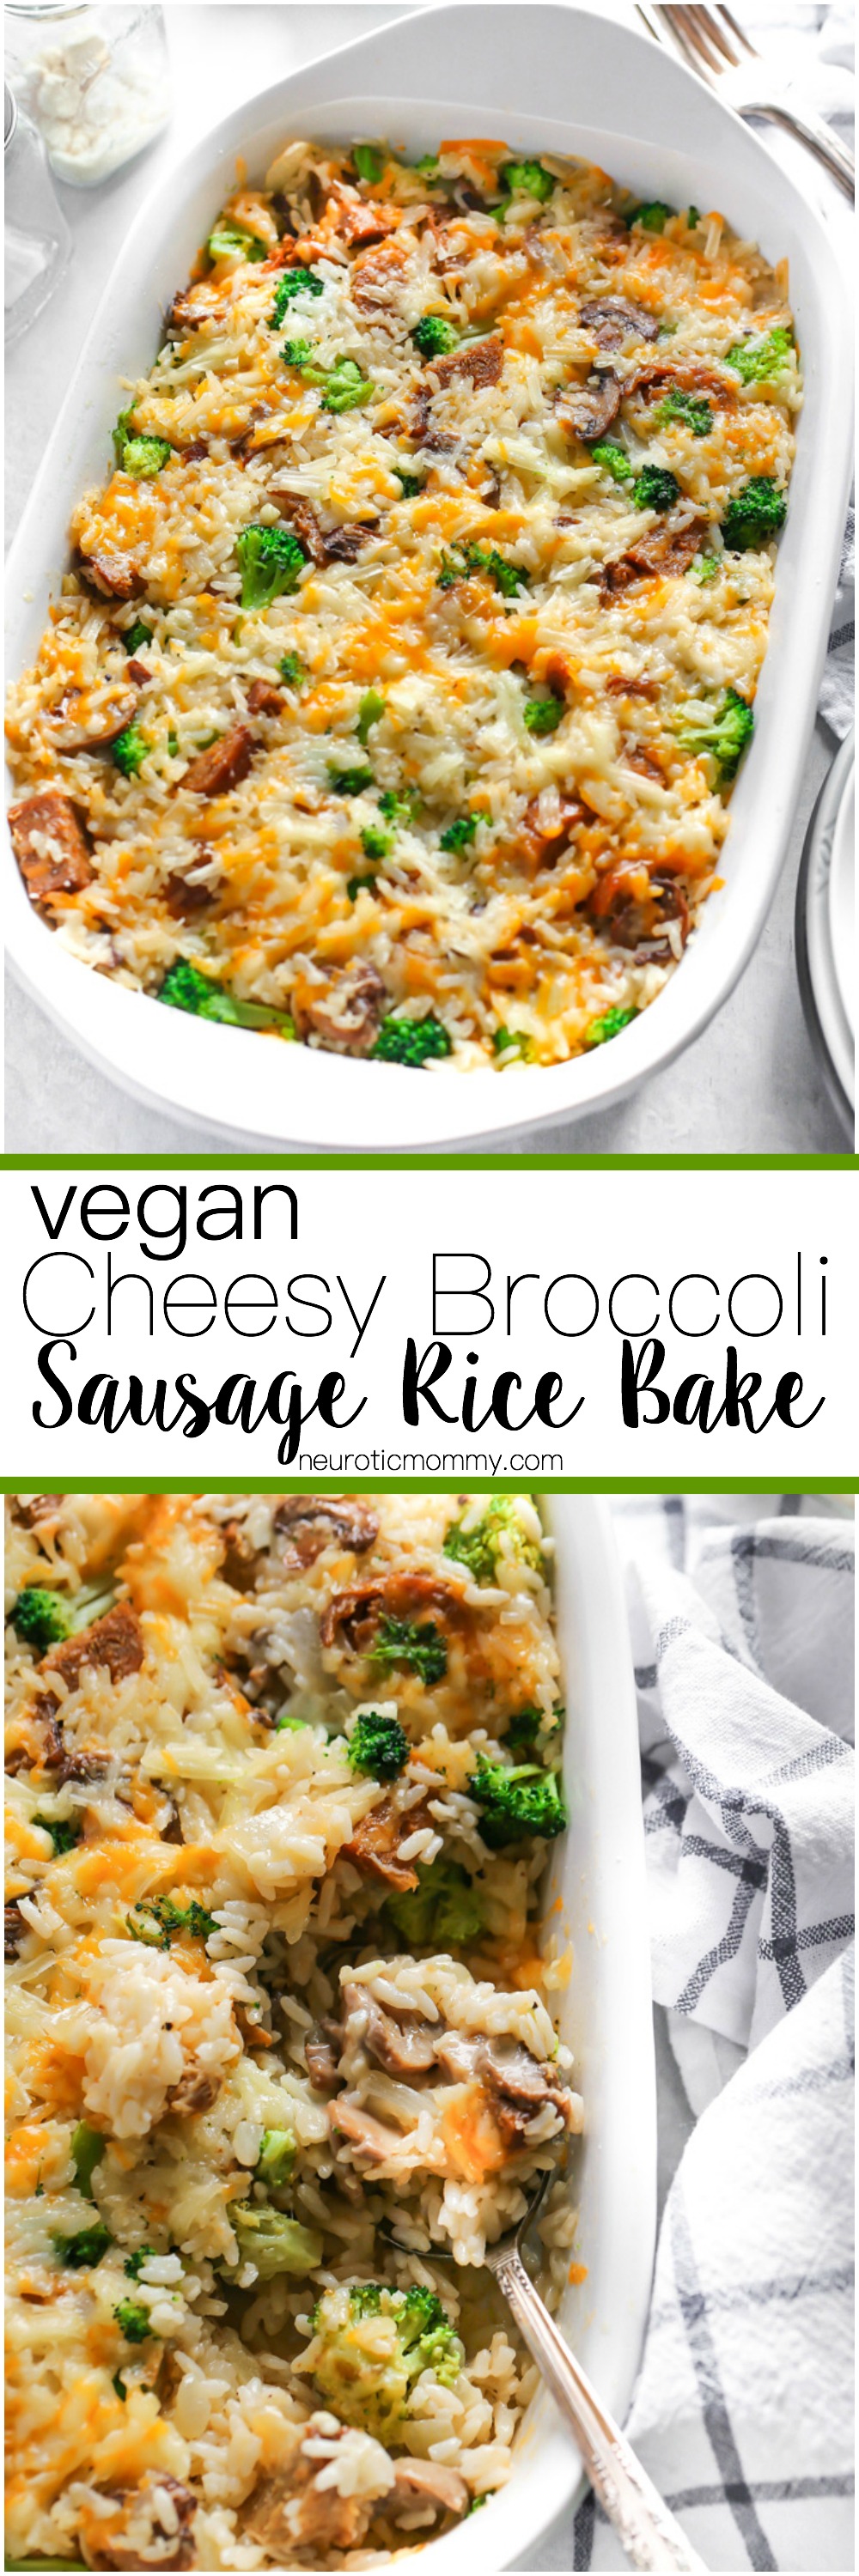 This broccoli "sausage" and cheese casserole is loaded with broccoli, rice, sausage, mushrooms and all finished off with a super melty cheesy topping. NeuroticMommy.com #vegandinner